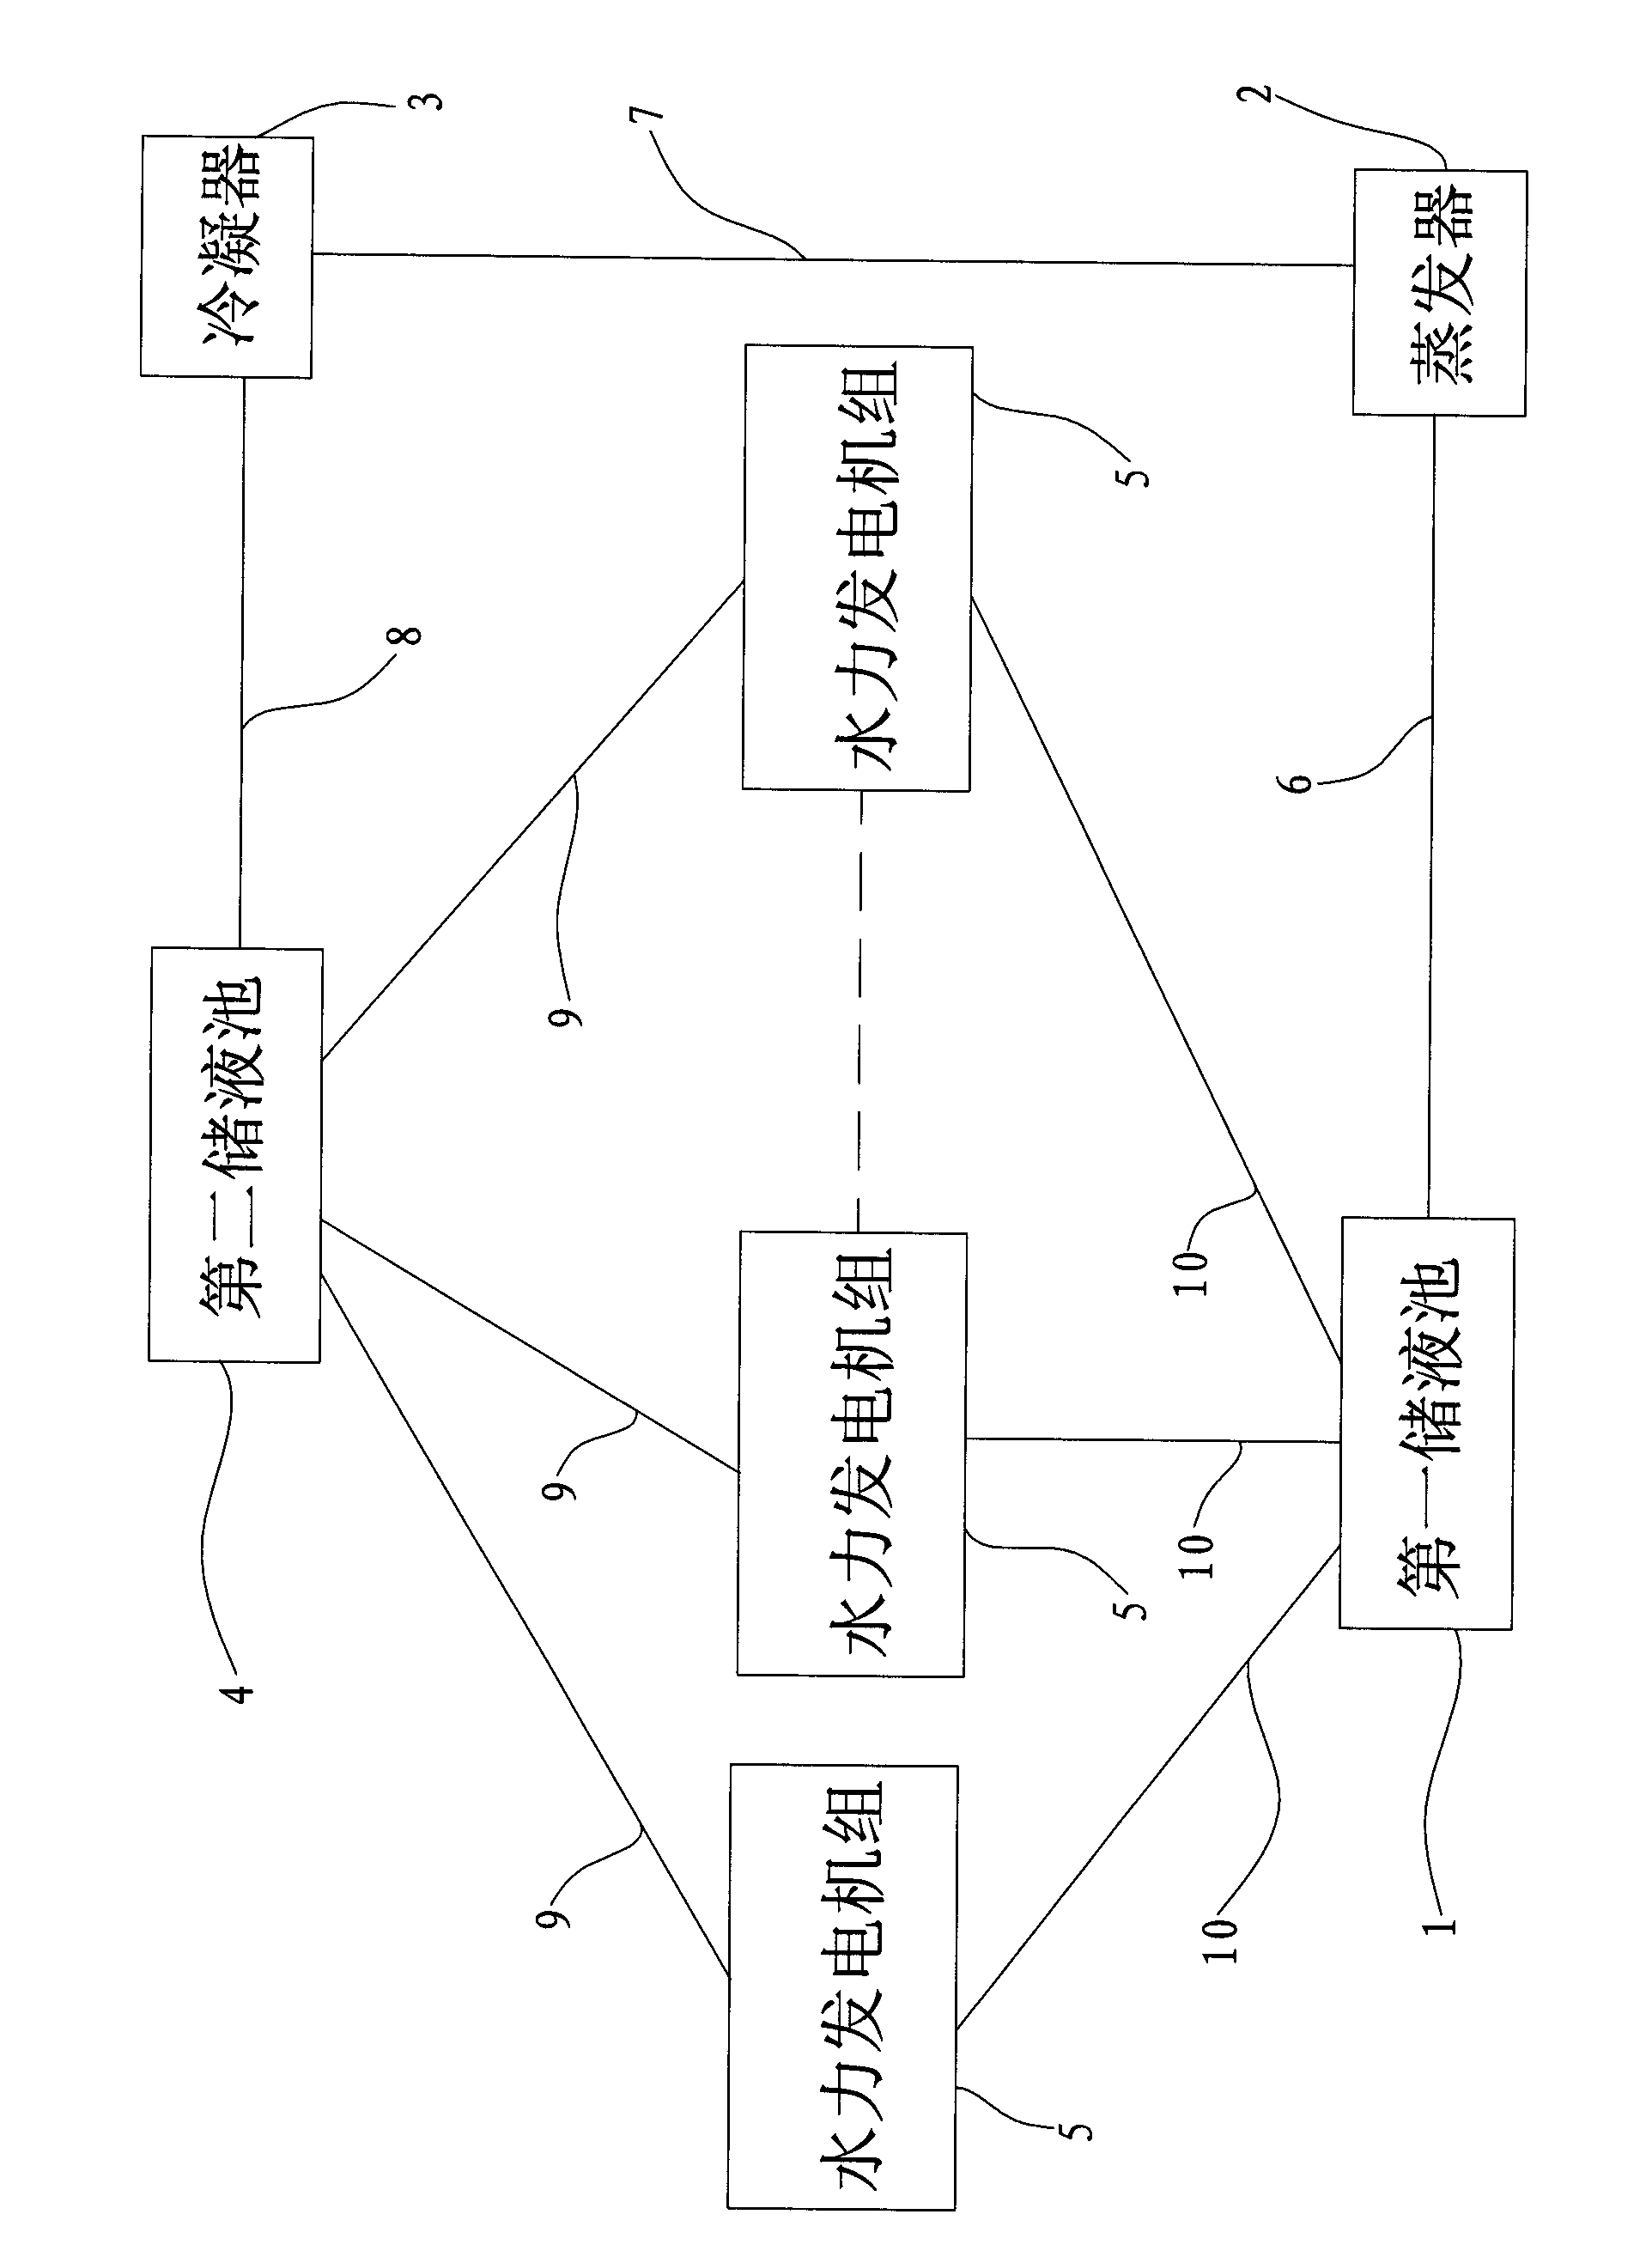 Atmosphere temperature difference power generation device